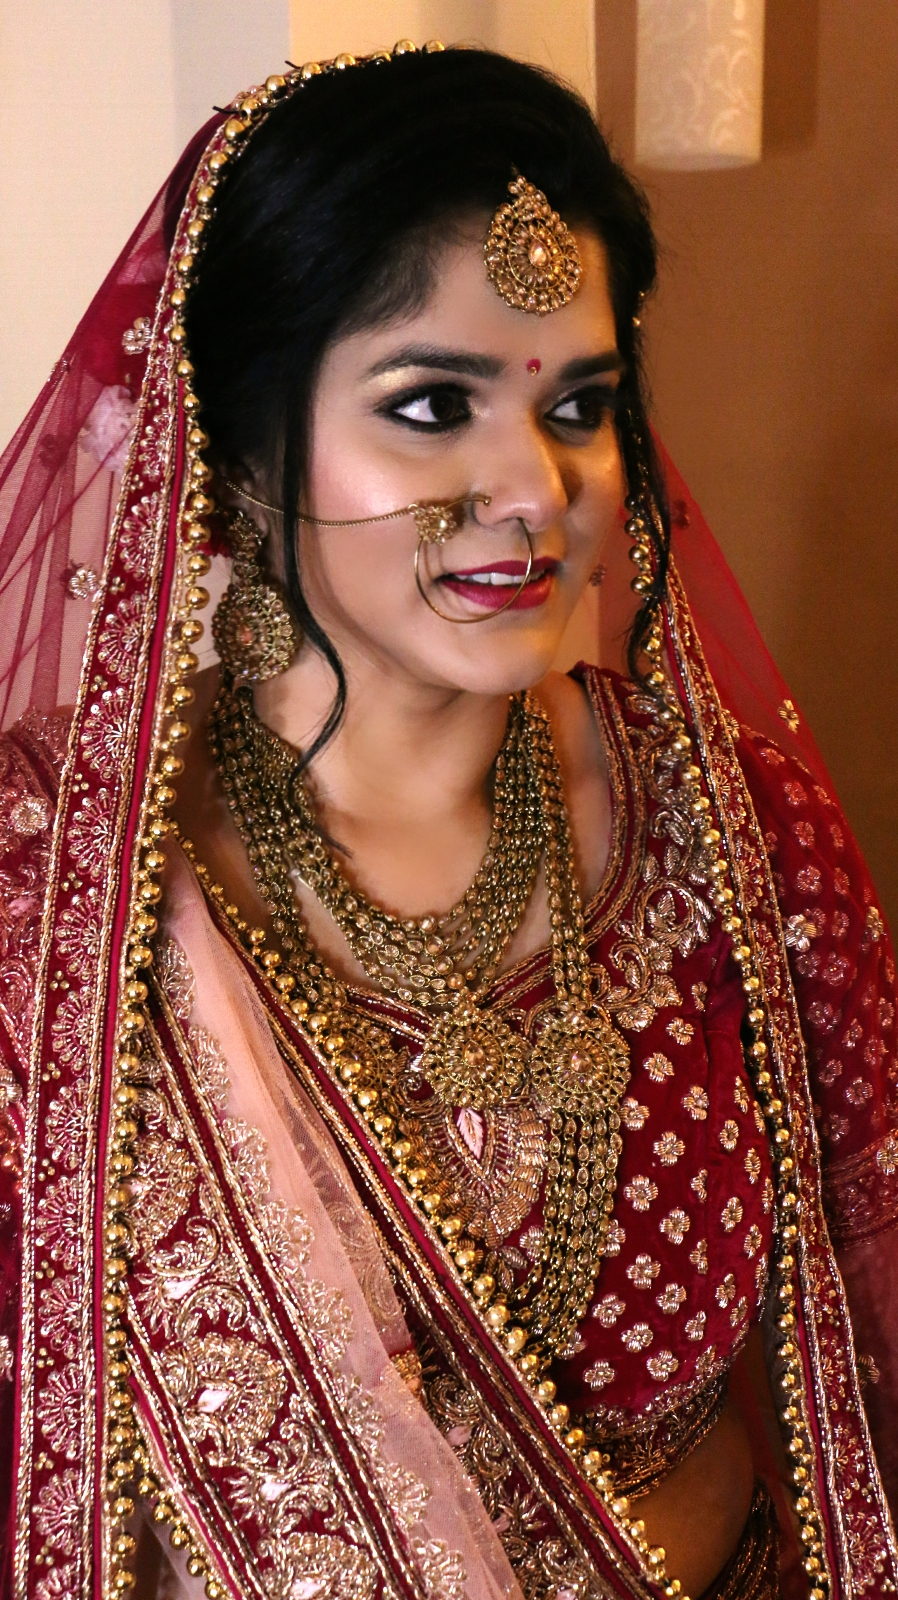 Bridal makeup in a aligarh